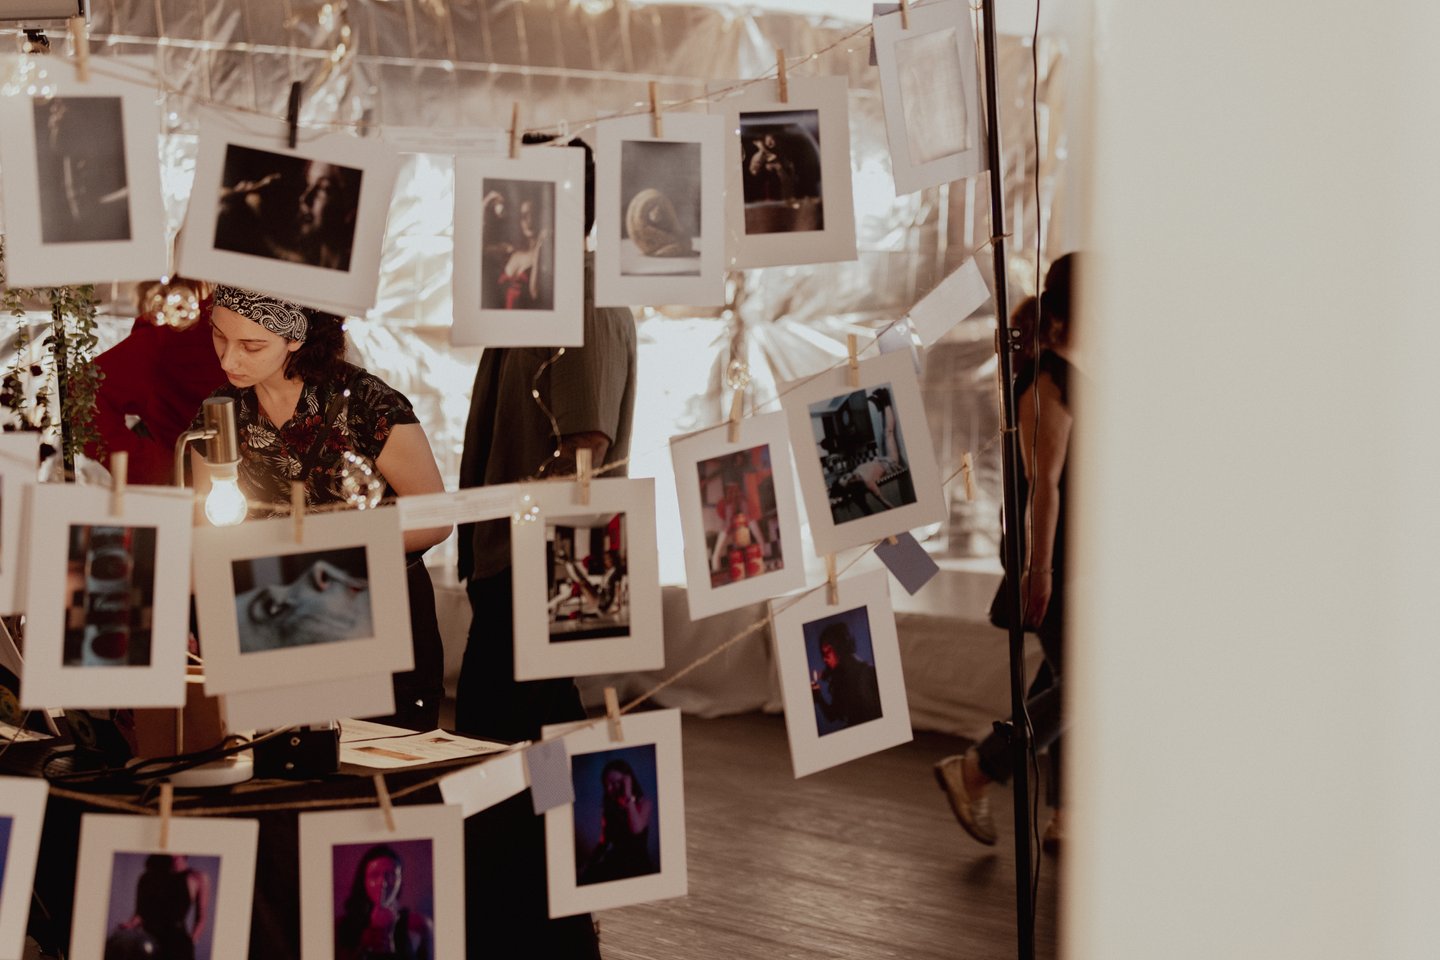 Polaroid photos hanging from a wire with a woman standing behind them, looking elsewhere.